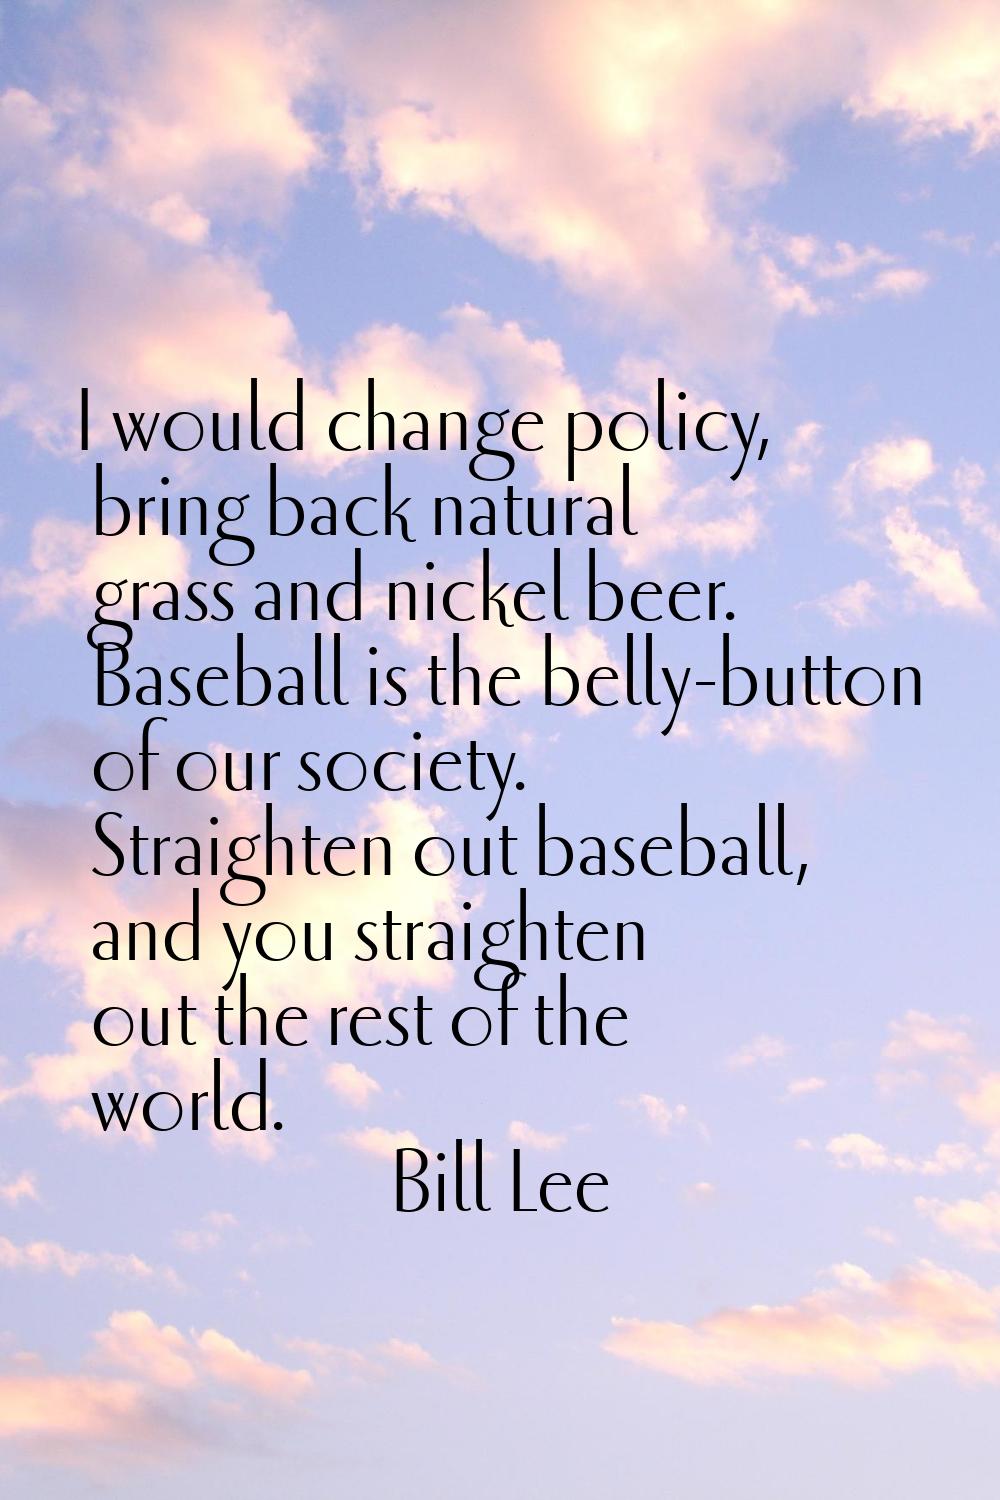 I would change policy, bring back natural grass and nickel beer. Baseball is the belly-button of ou